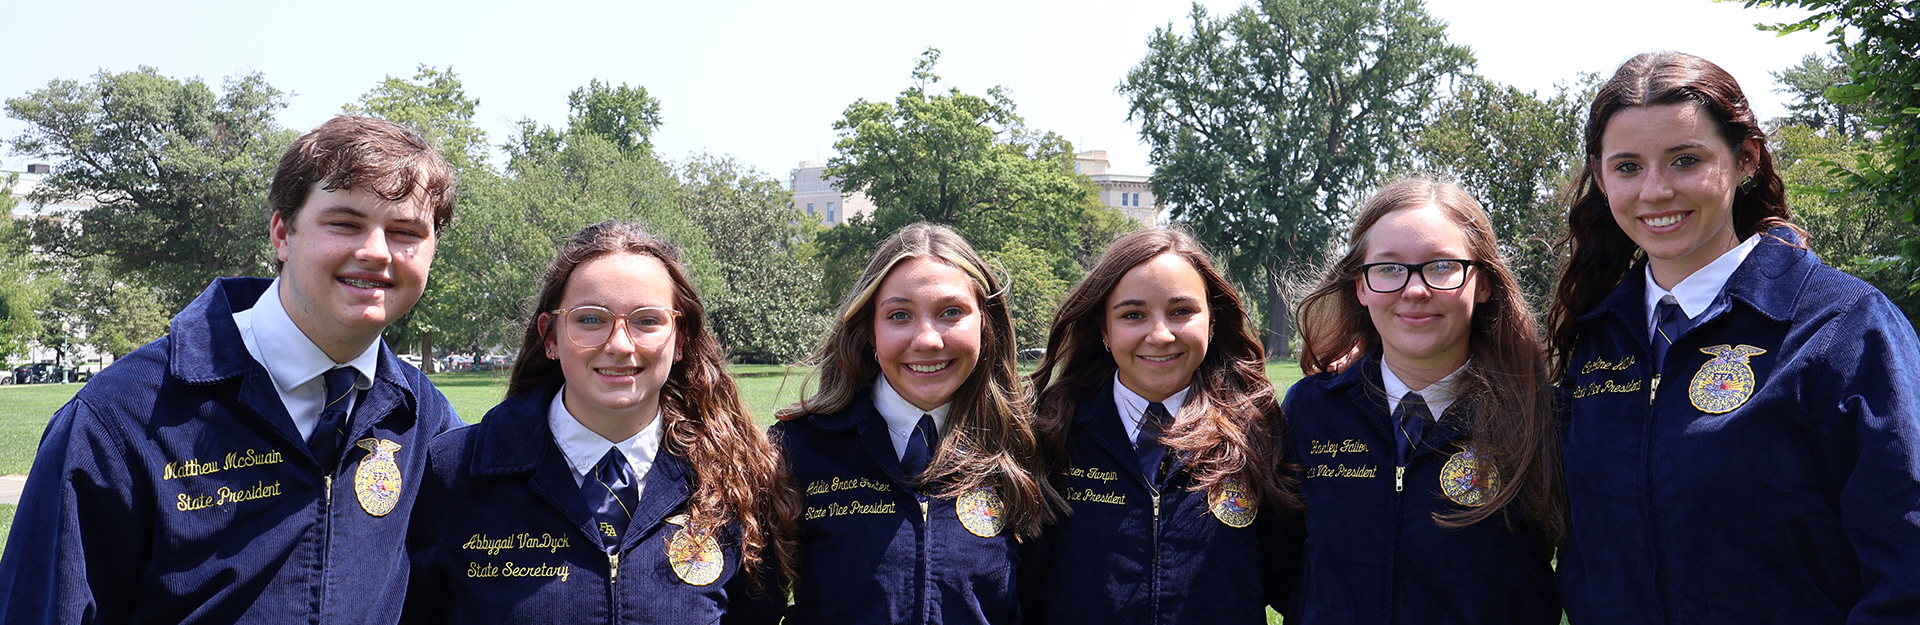 group of ffa members standing together